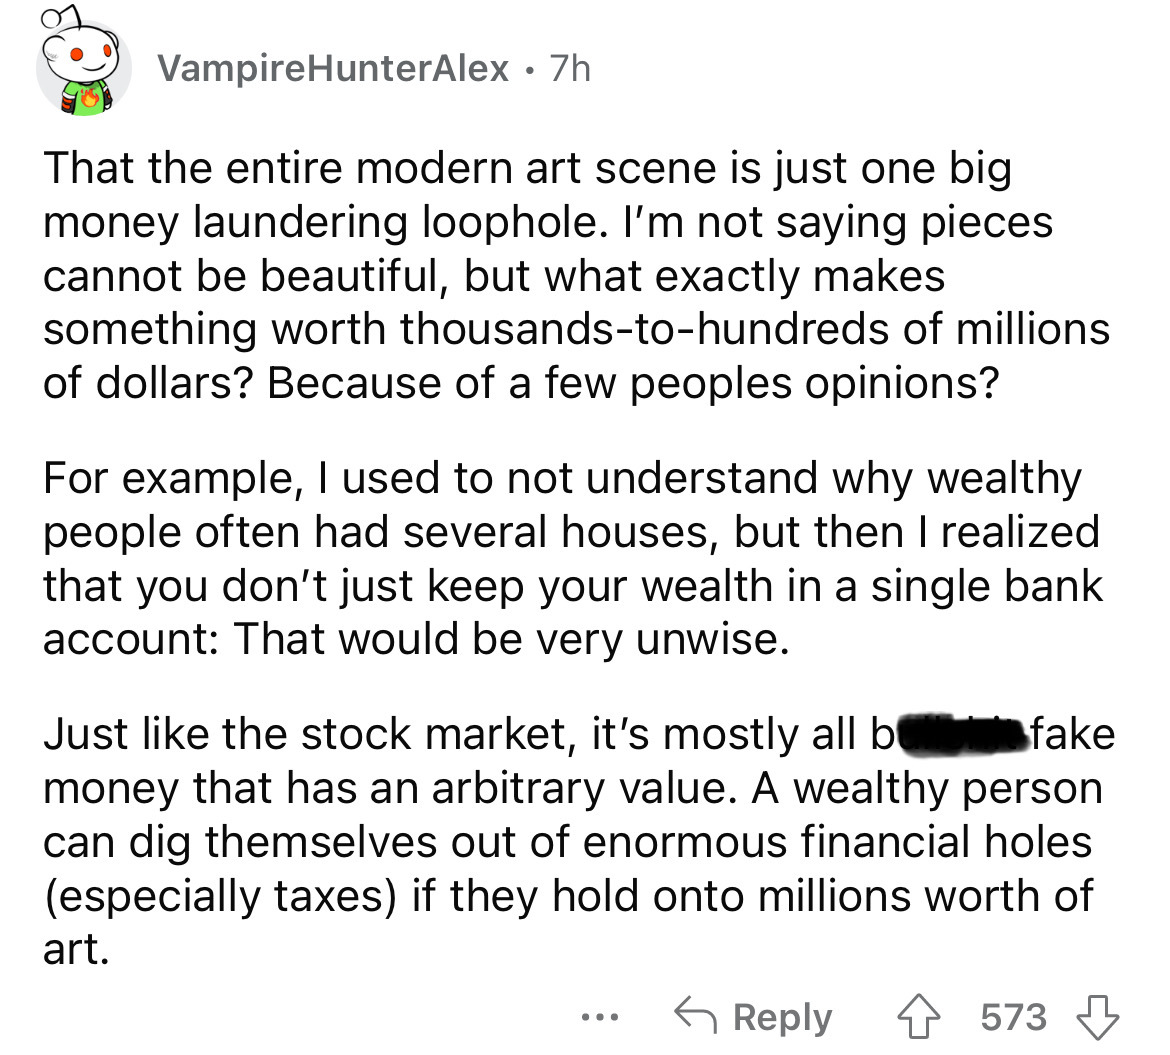 document - VampireHunterAlex .7h That the entire modern art scene is just one big money laundering loophole. I'm not saying pieces cannot be beautiful, but what exactly makes something worth thousandstohundreds of millions of dollars? Because of a few peo